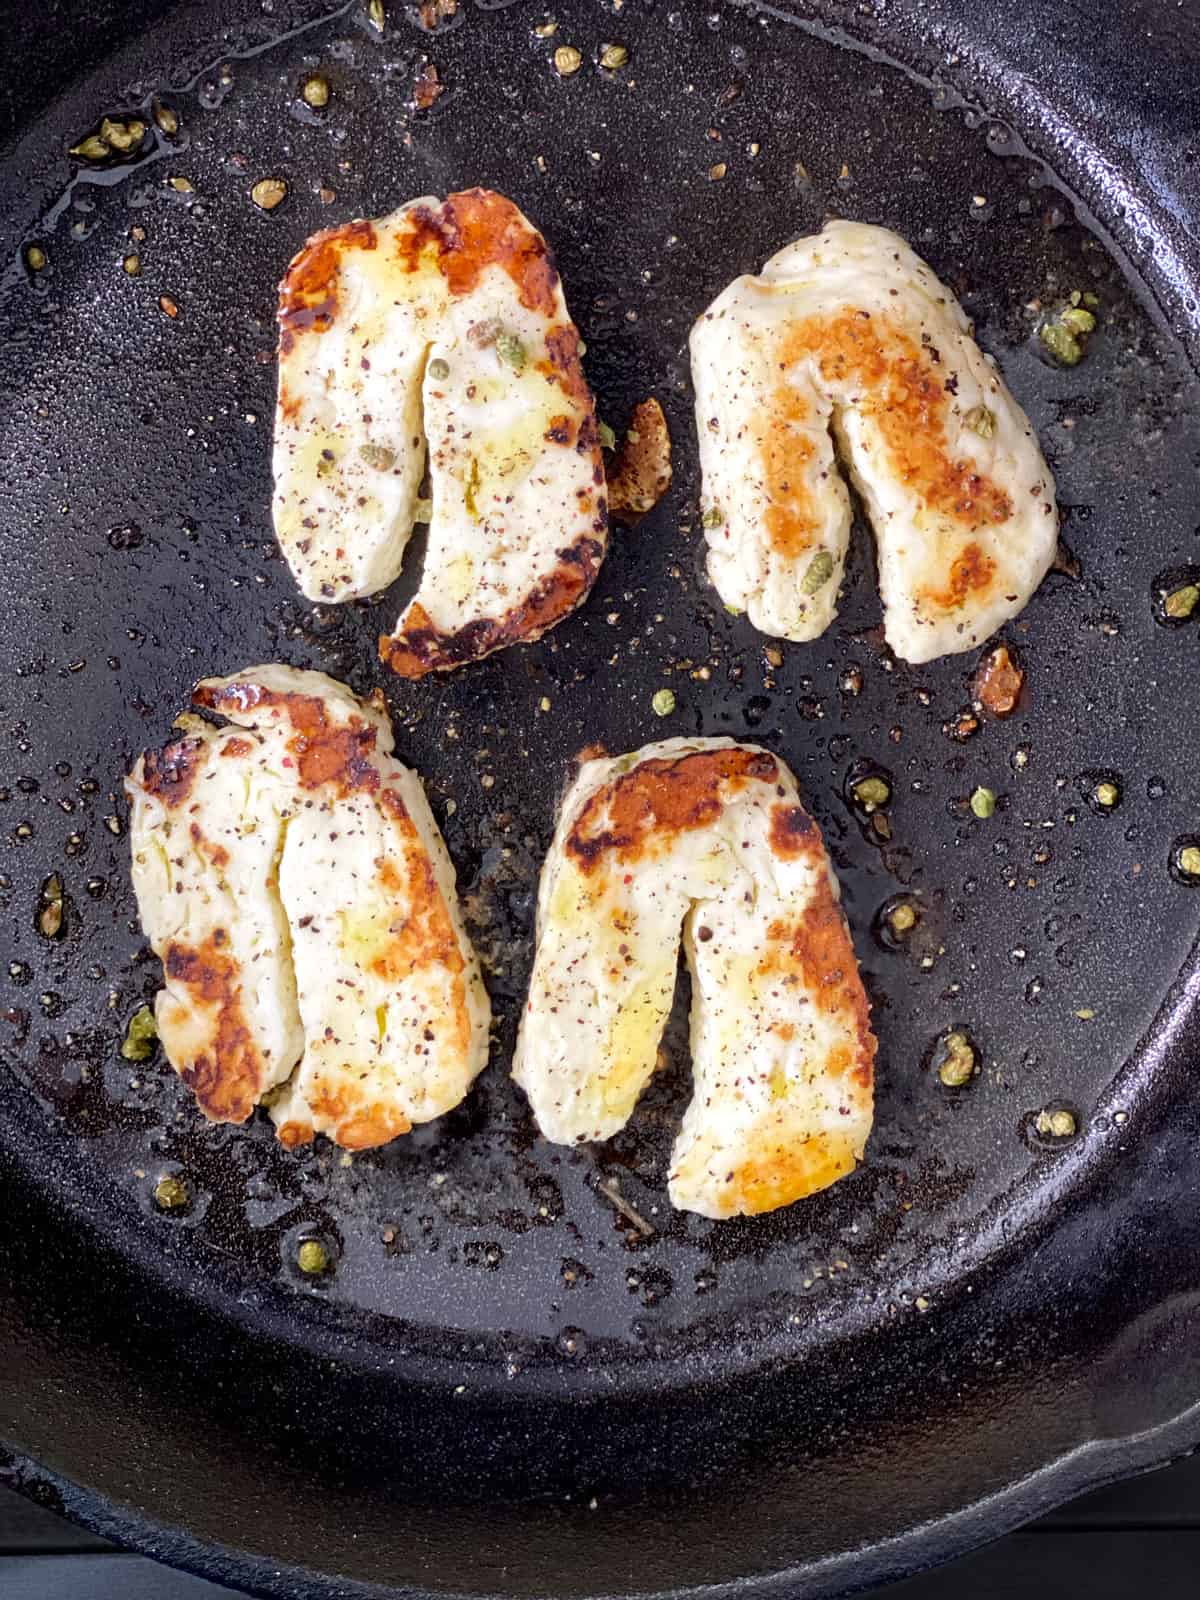 Two slices of halloumi cheese on cast iron.